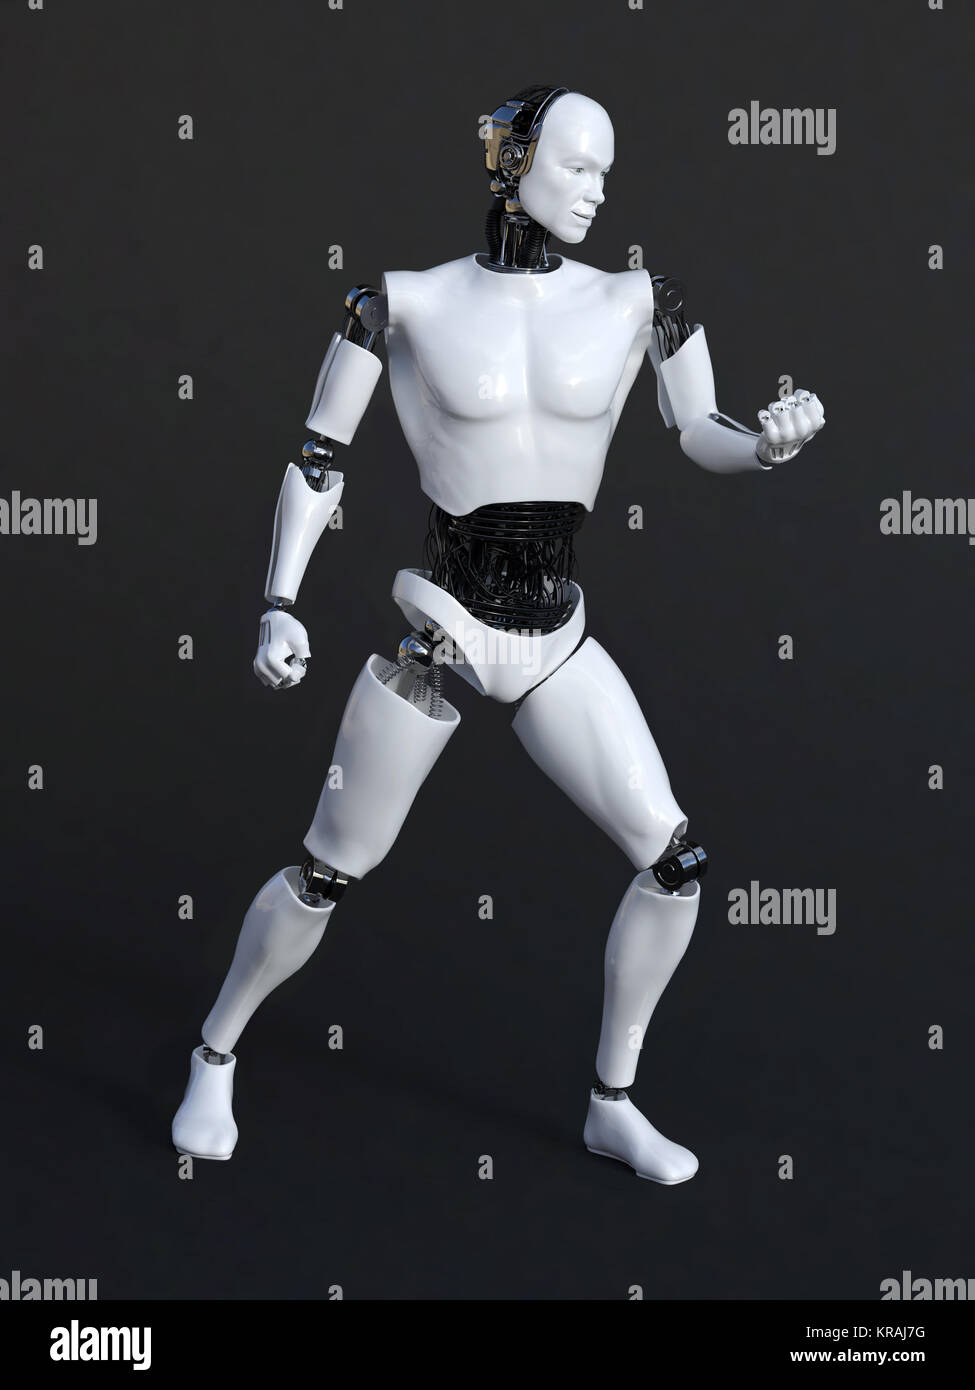 3D rendering of a robot man in a victory pose. Stock Photo